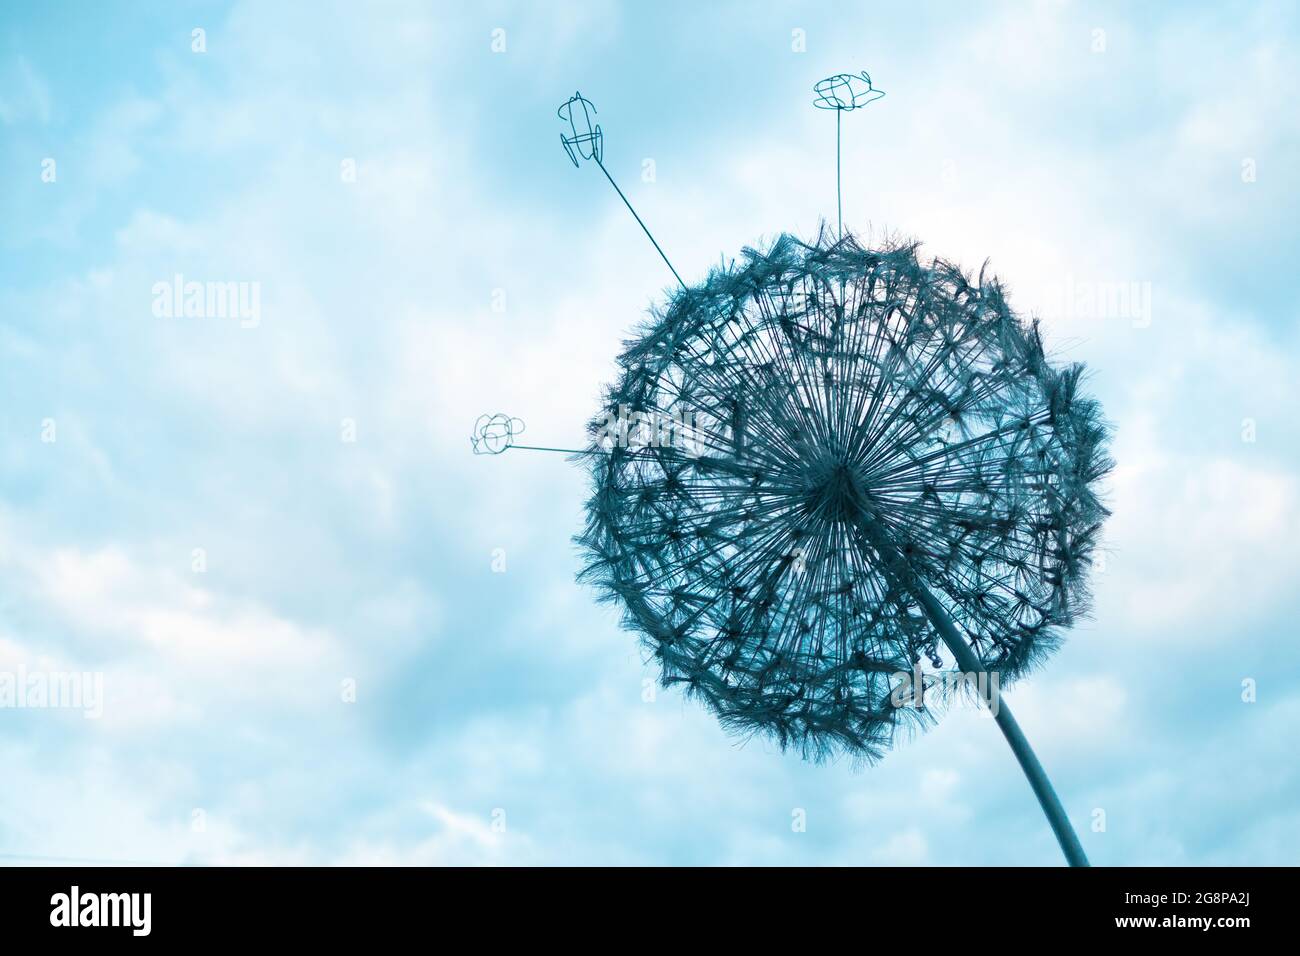 Street decorative lamp in the form of large dandelion against the sky. Stock Photo